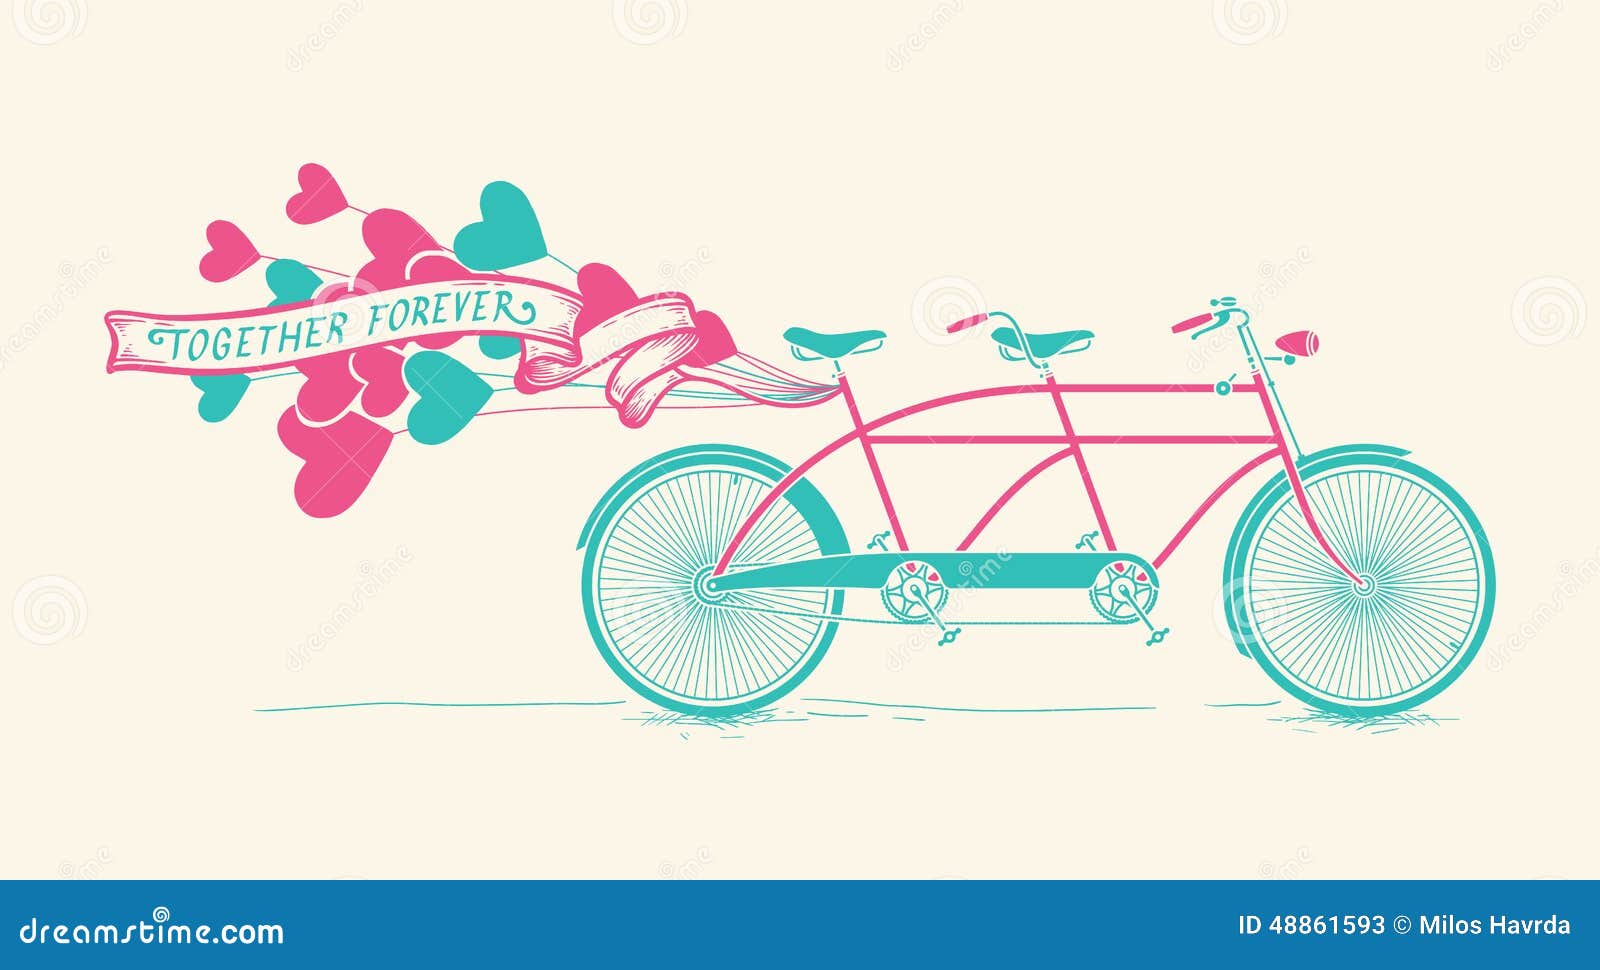 together forever - vintage tandem bicycle with hearts balloons